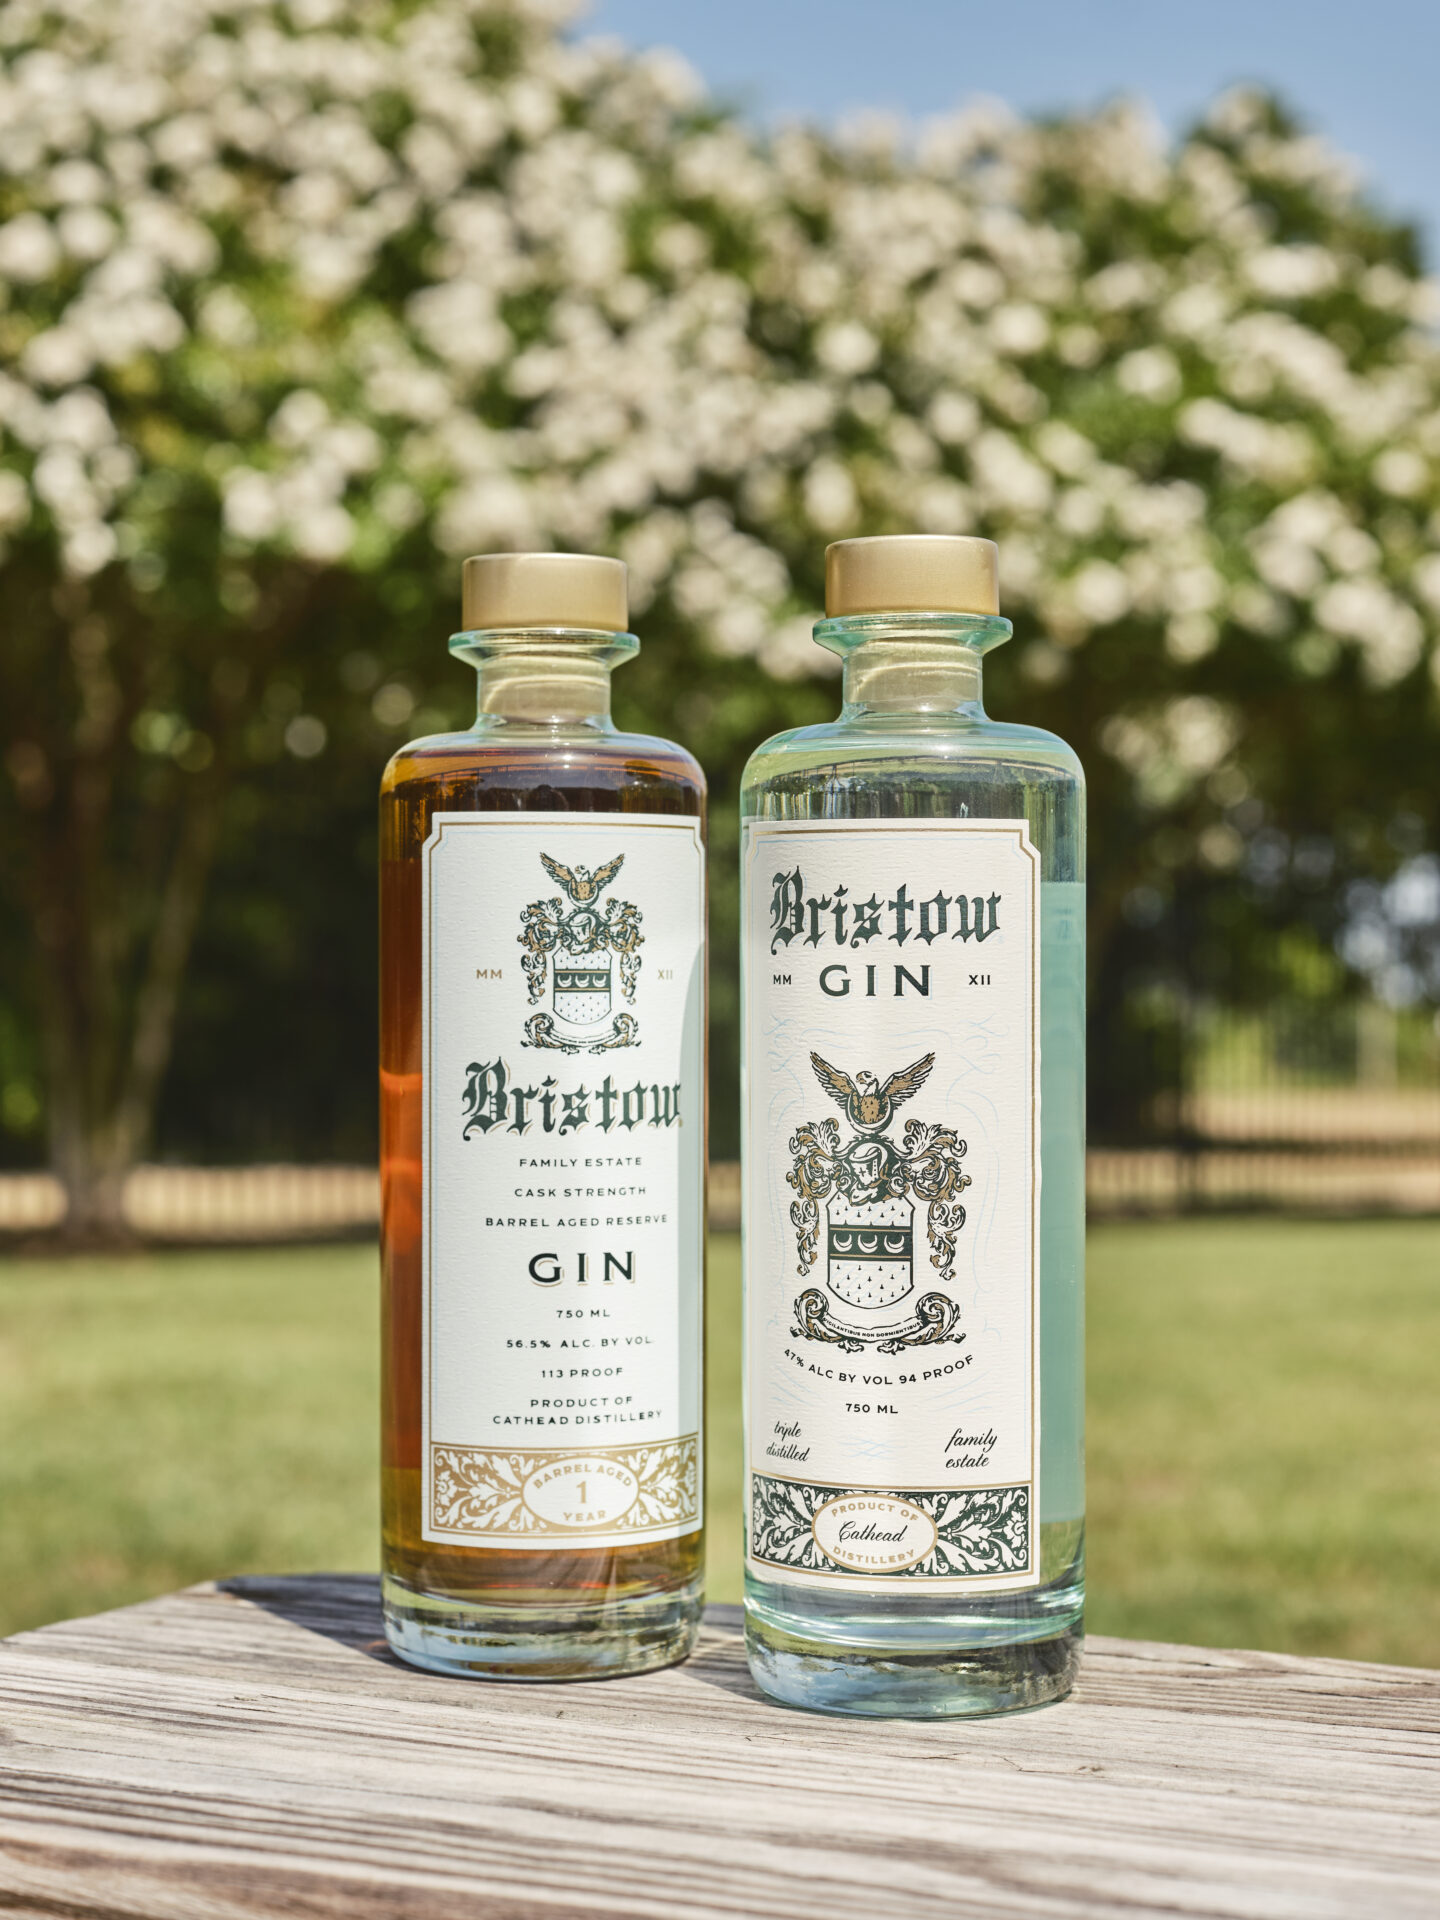 Bristow gin bottles by Cathead Distillery against a floral tree